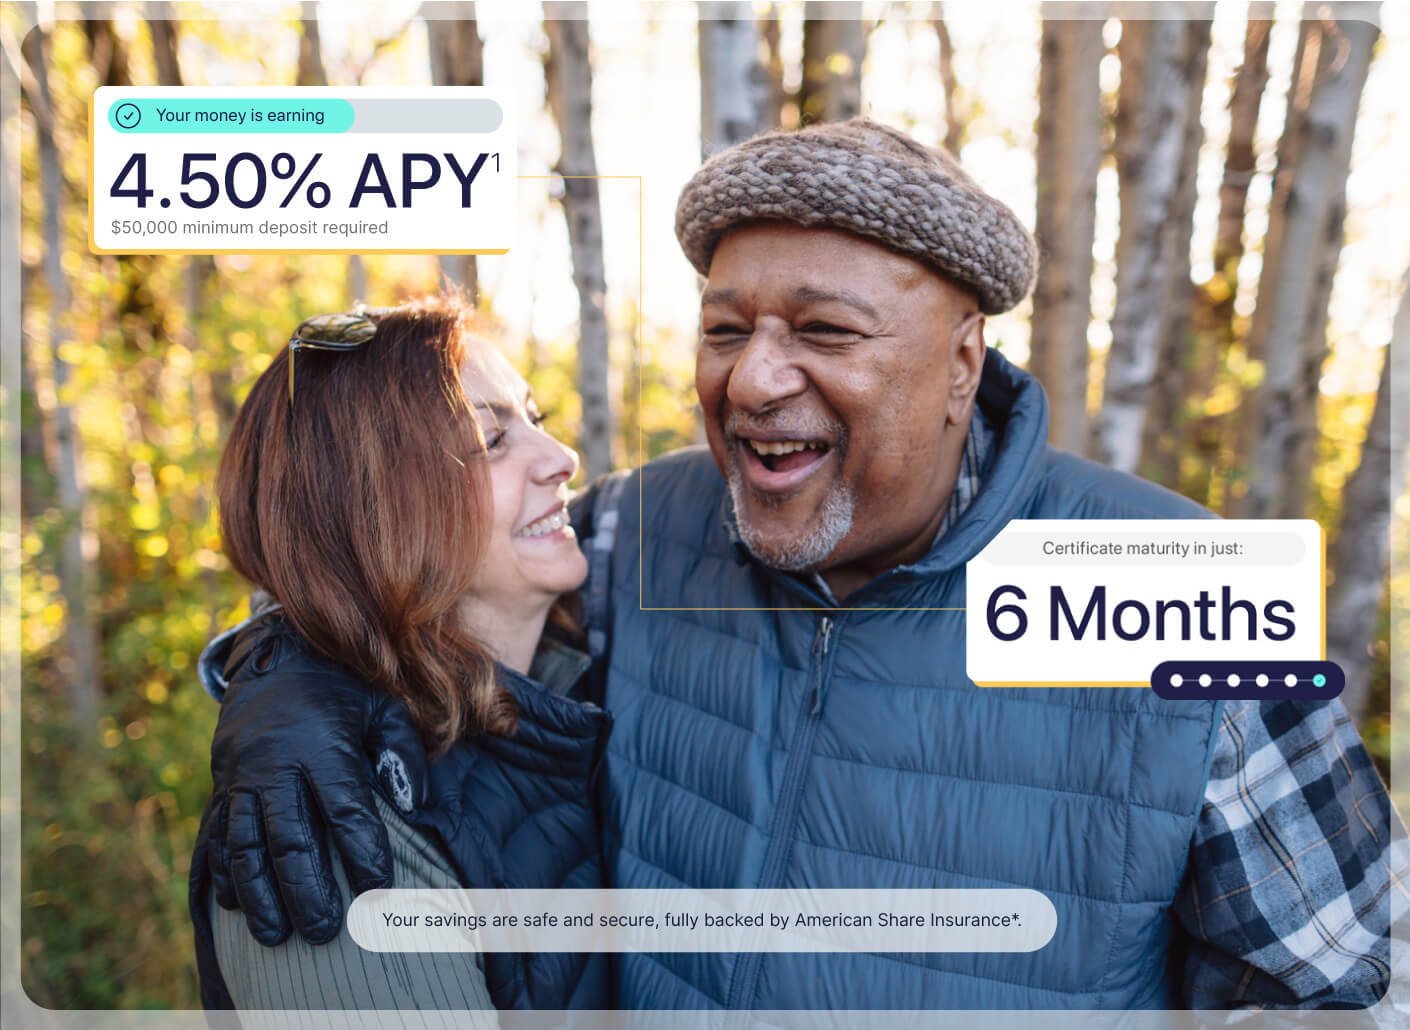 Your money is earning 4.50% APY ($50,000 minimum deposit required) | Certificate maturity in just 6 months [mobile]